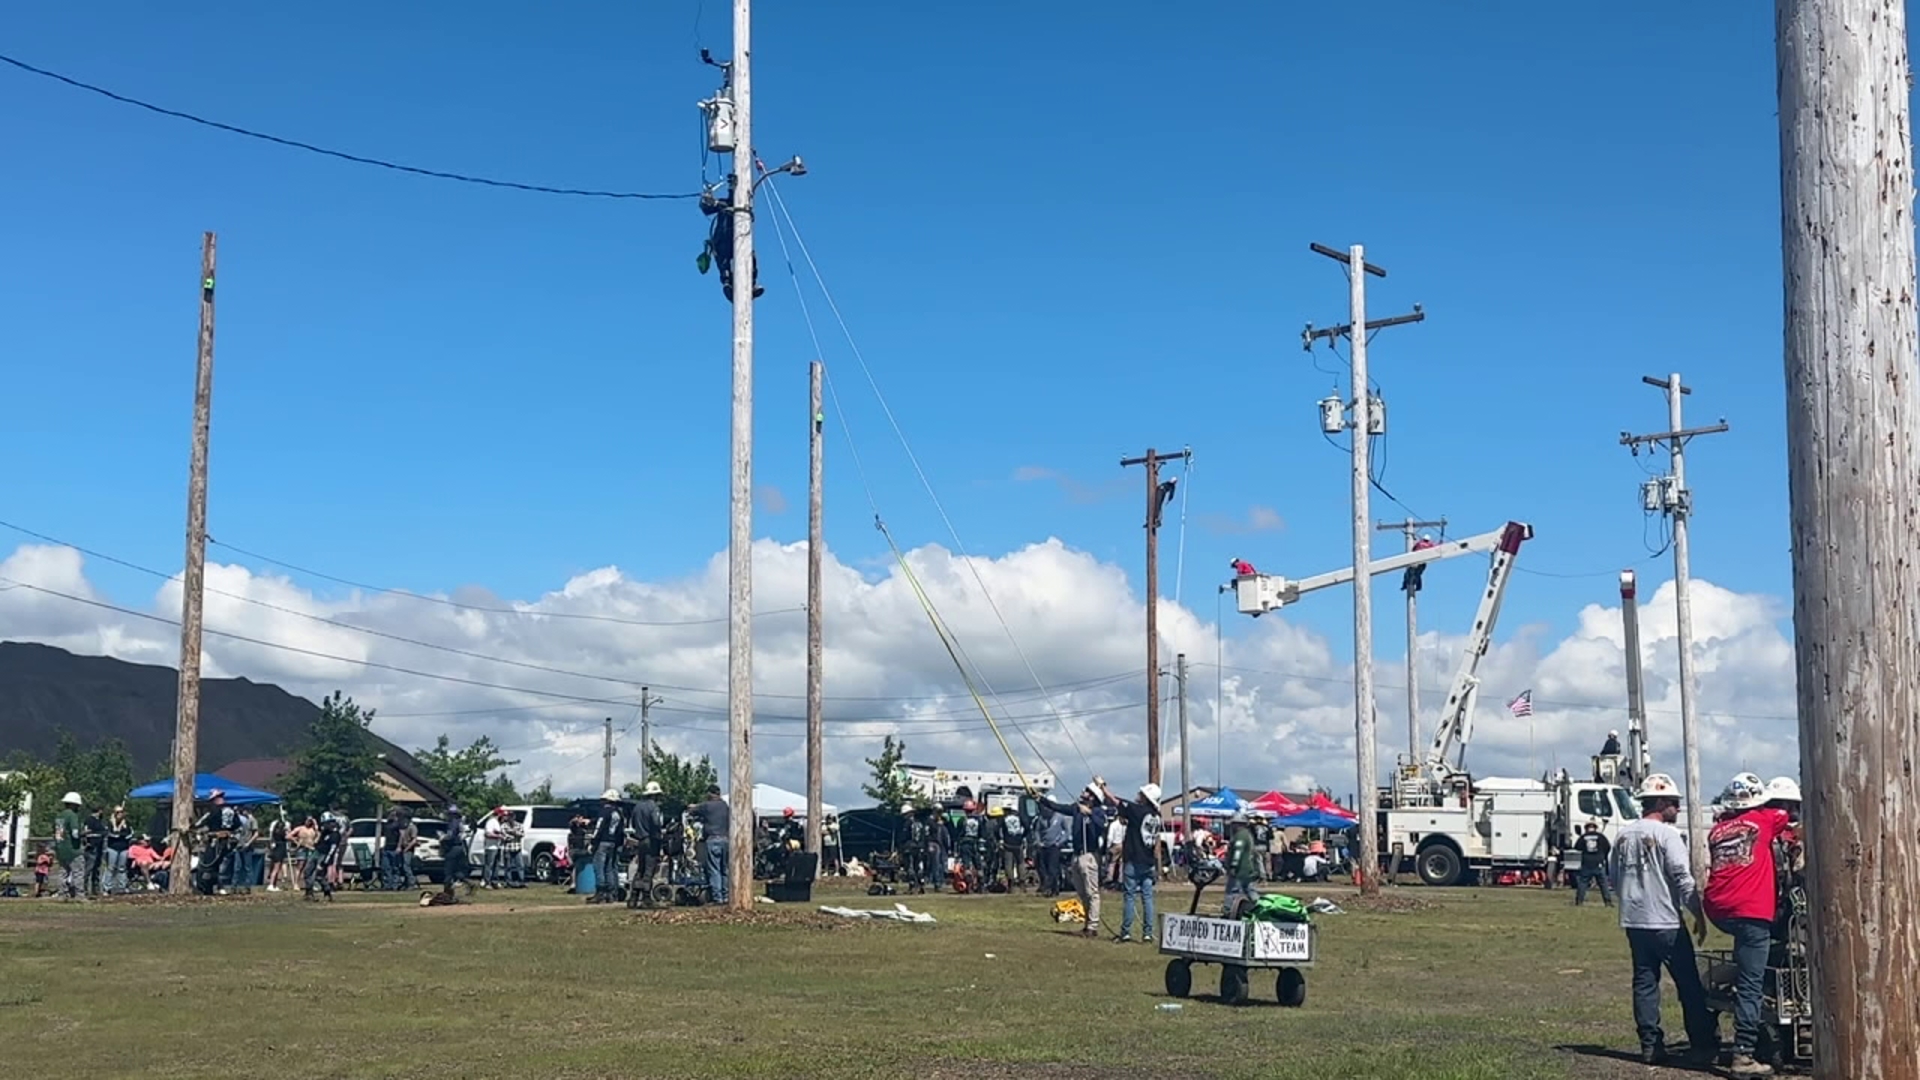 Linemen from across the country gathered at City View Park in Hazleton Saturday for the 12th Annual Lineworkers Benefit Rodeo.